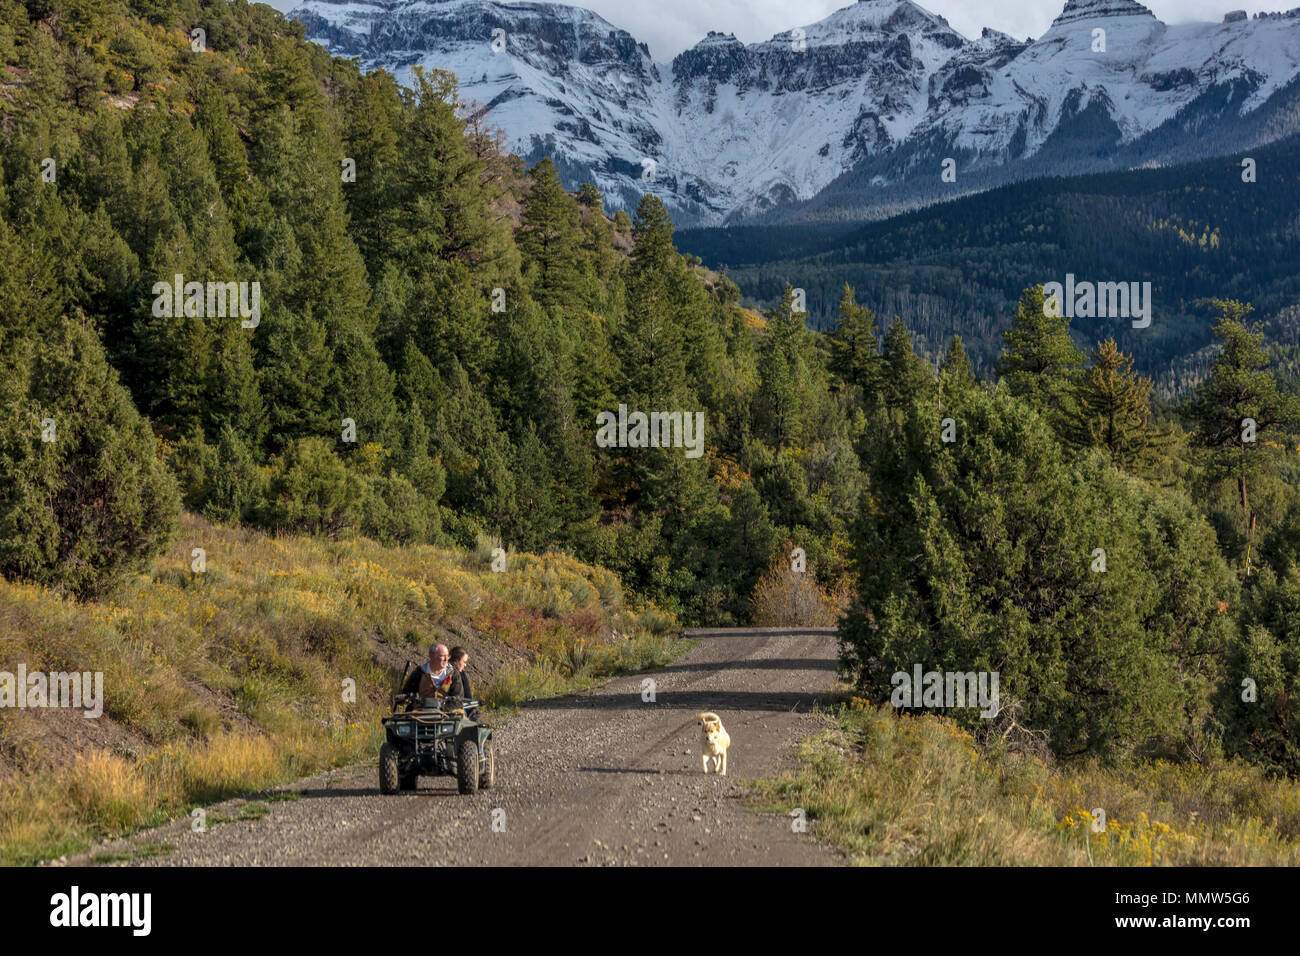 SEPTEMBER 23, 2017 - RIDGWAY, COLORADO - County Road 7 towards San Juan Mountains and Mnt Sneffels shows ATV drivers with labadore dog running alongside Stock Photo